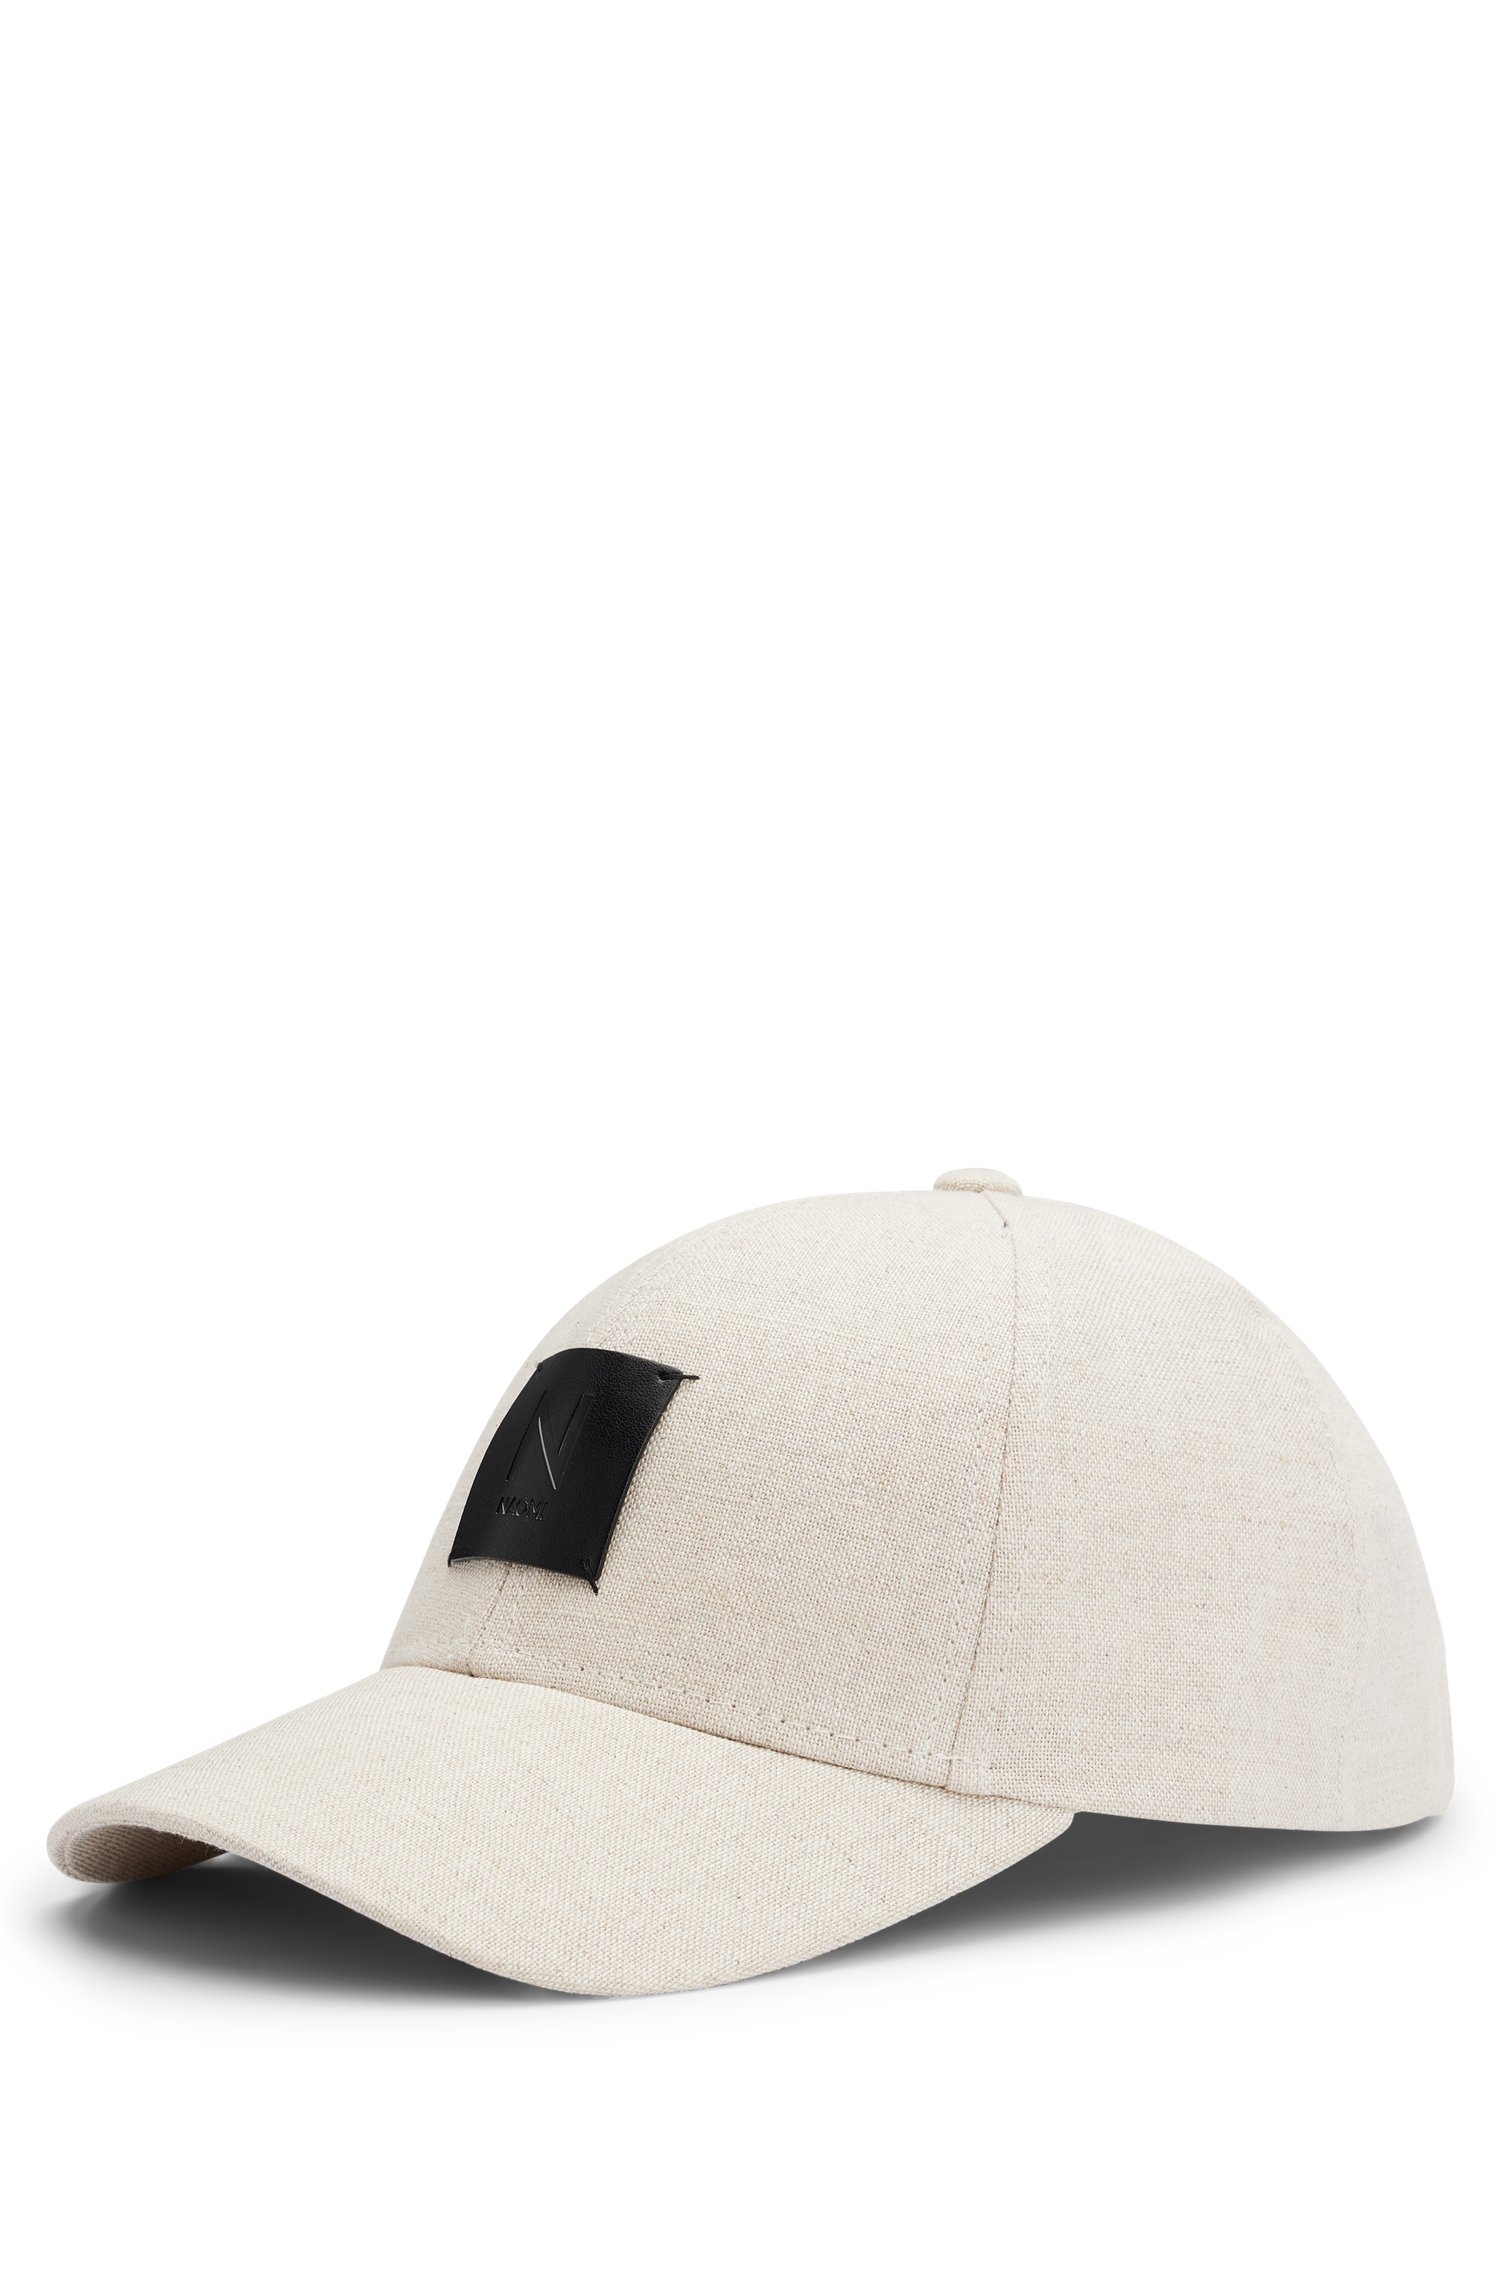 NAOMI x BOSS cap in cotton with logo patch